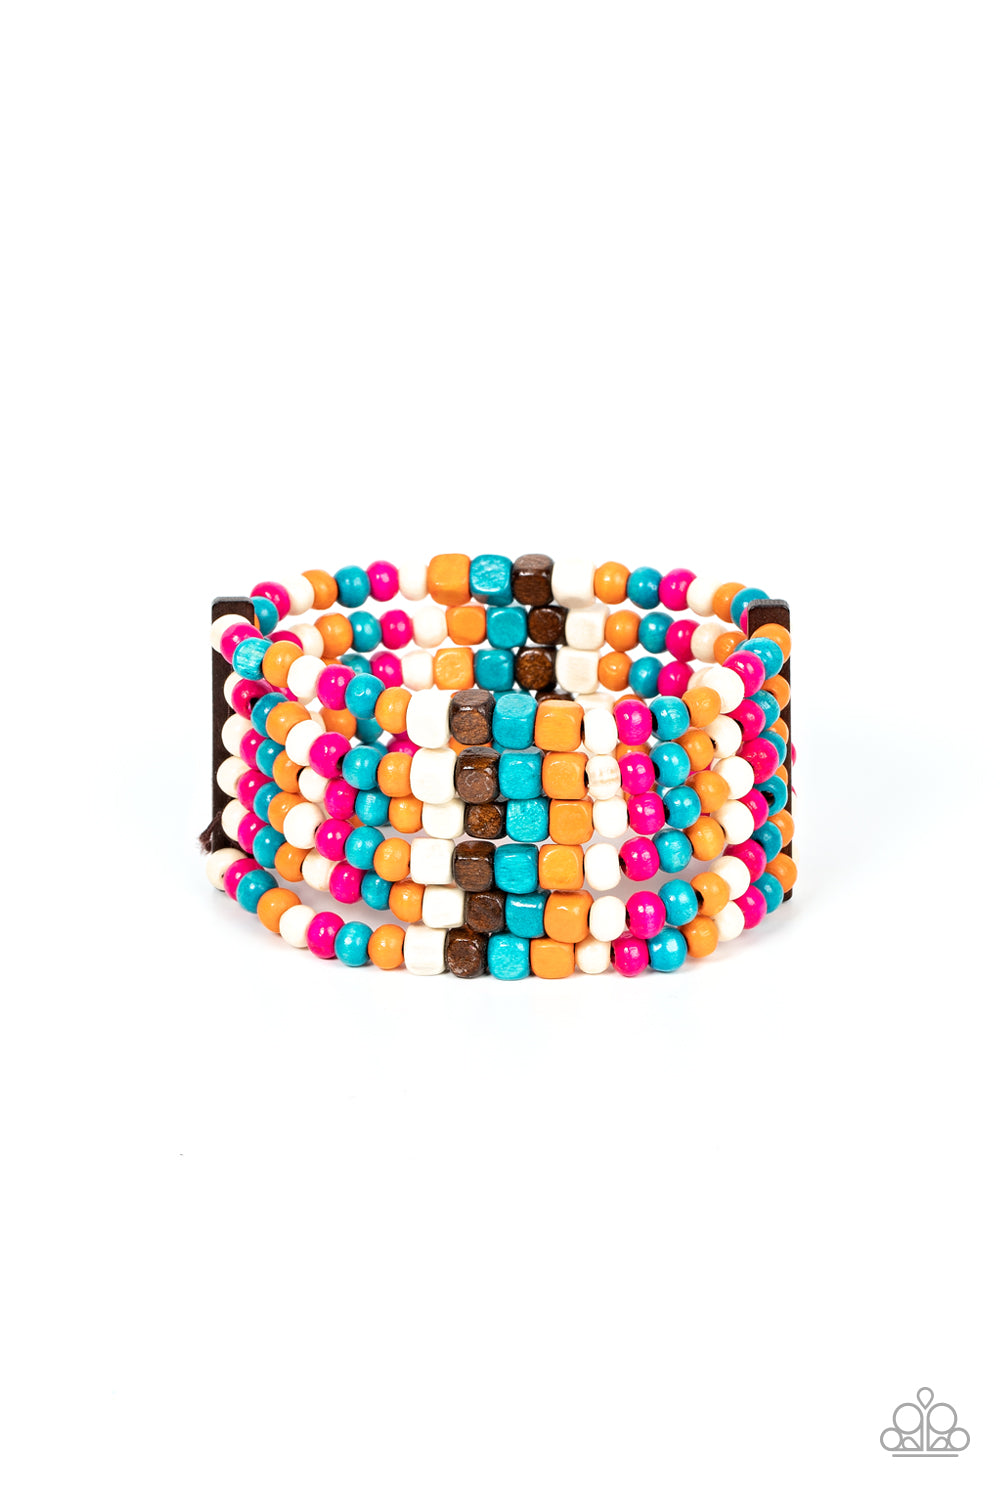 Dive into Maldives Multi Wooden Bracelet - Paparazzi Accessories  Held together with rectangular wooden frames, a colorful collection of orange, blue, brown, white, and Fuchsia Fedora cube and round wooden beads are threaded along stretchy bands around the wrist for a splash of tropical inspiration.  Sold as one individual bracelet.